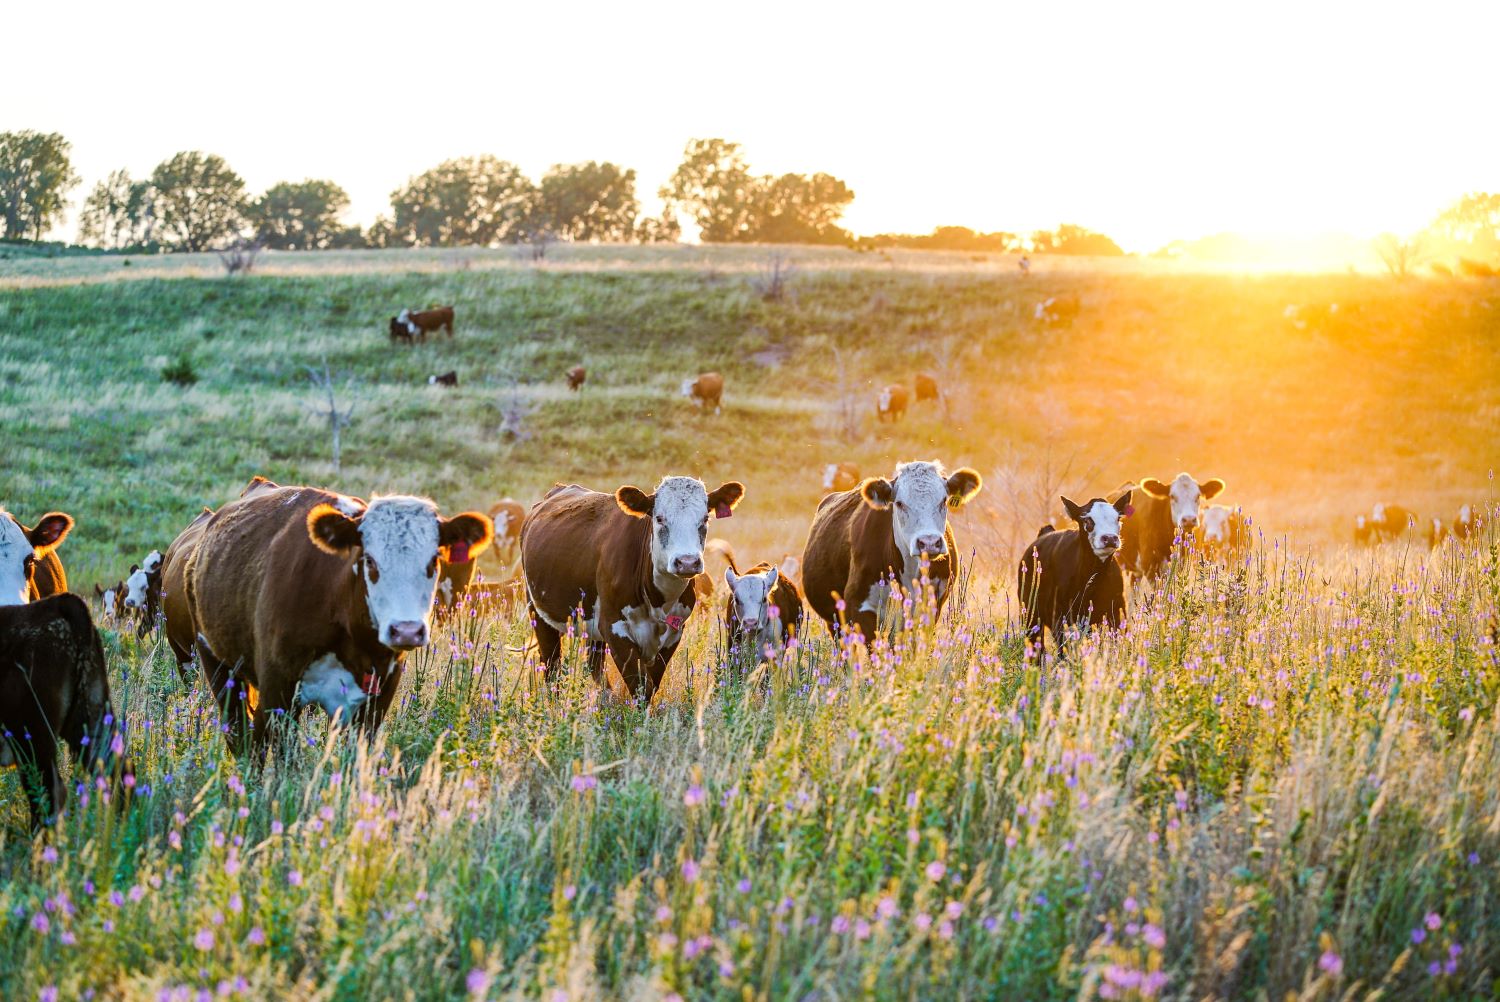 Grazing cattle on a diverse forage crop could benefit soil health